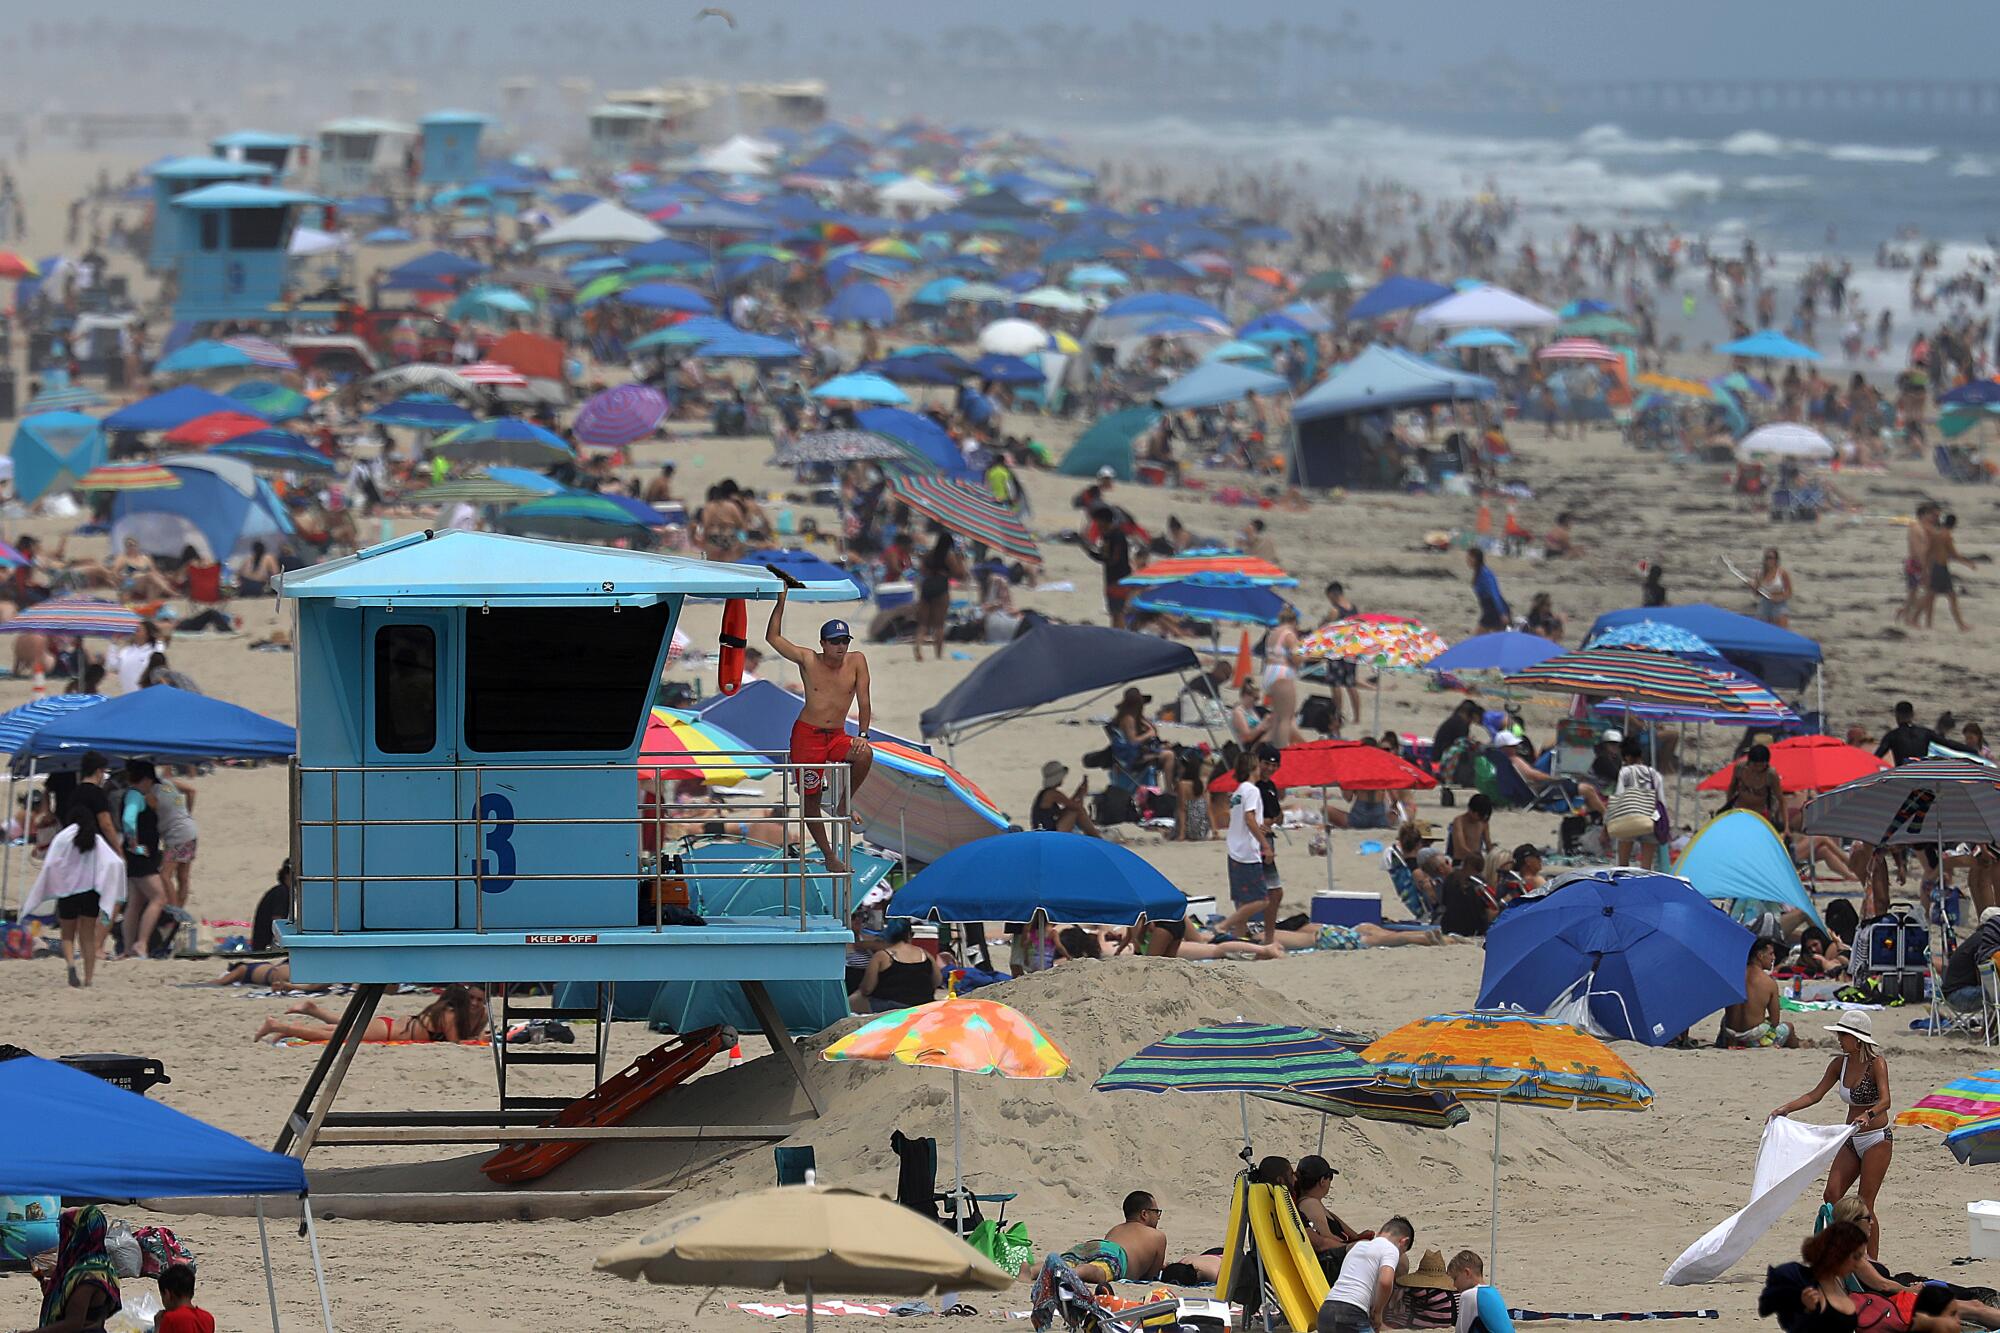 A life guard keeps watch on the crowd of people on Tuesday, June 15, 2021 in Huntington Beach